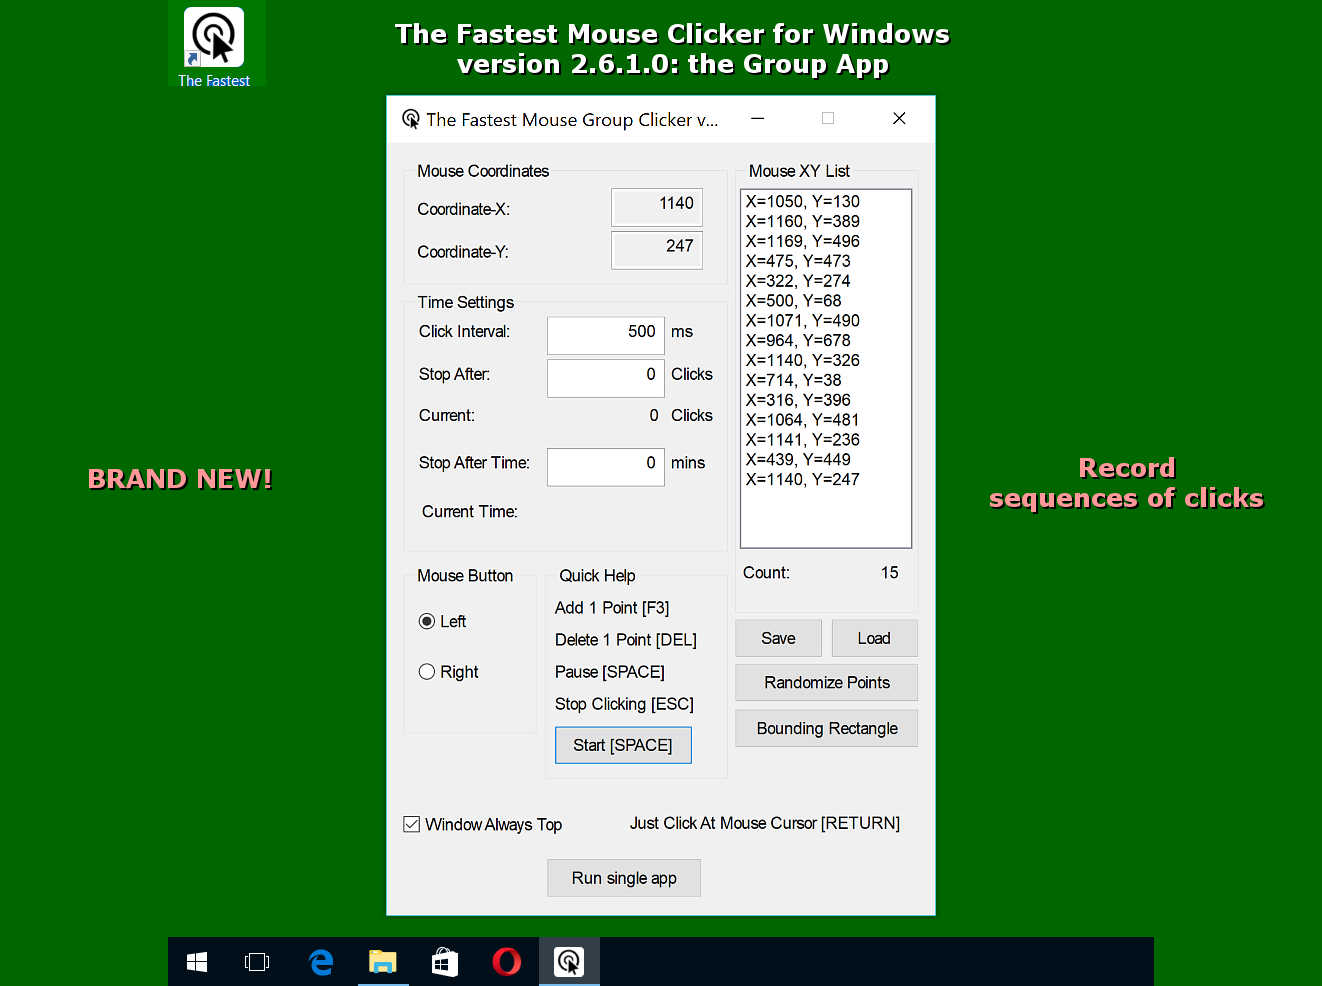 The Fastest Mouse Clicker for Windows version 2.6.1.0: the brand new Group App in details